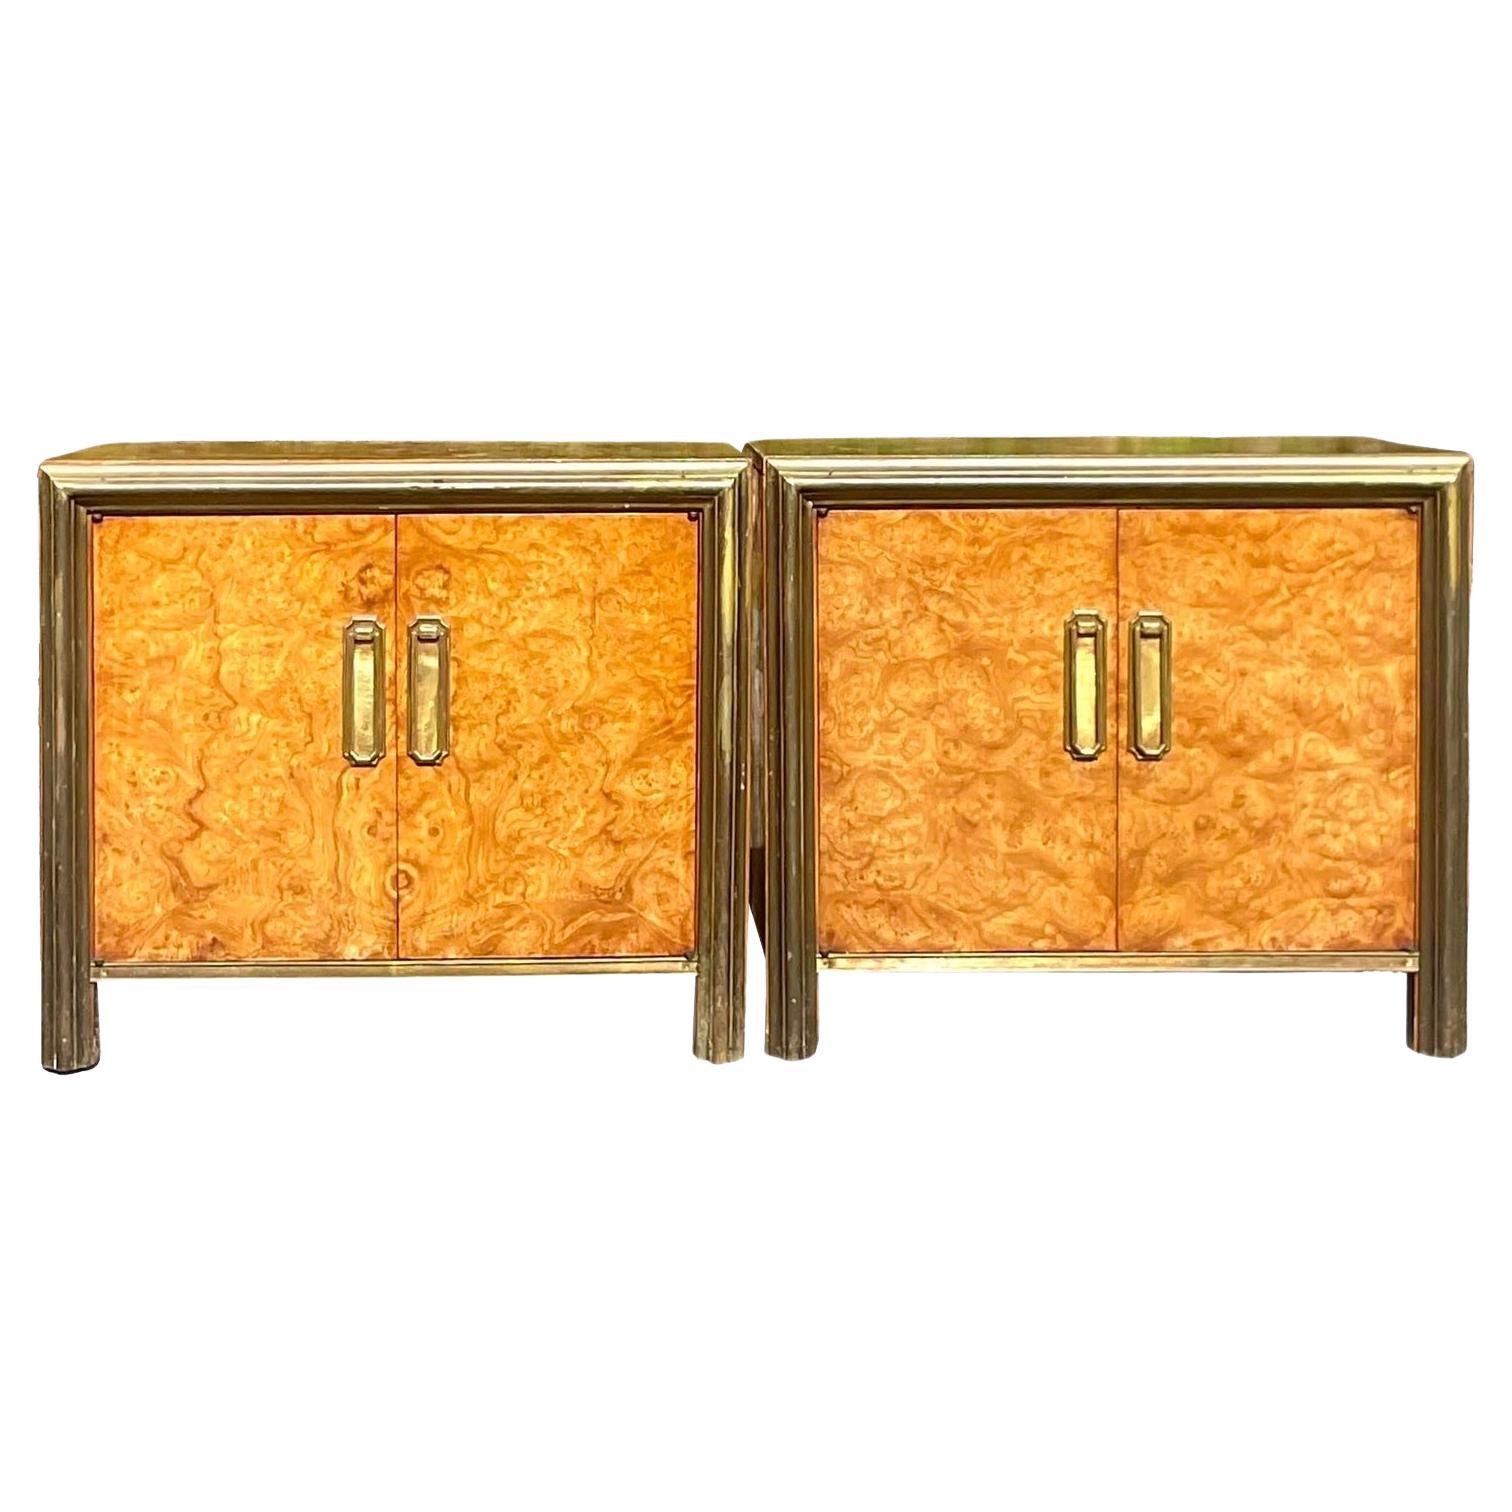 Mid 20th Century Vintage Boho Mastercraft Burl Wood Nightstands - a Pair For Sale